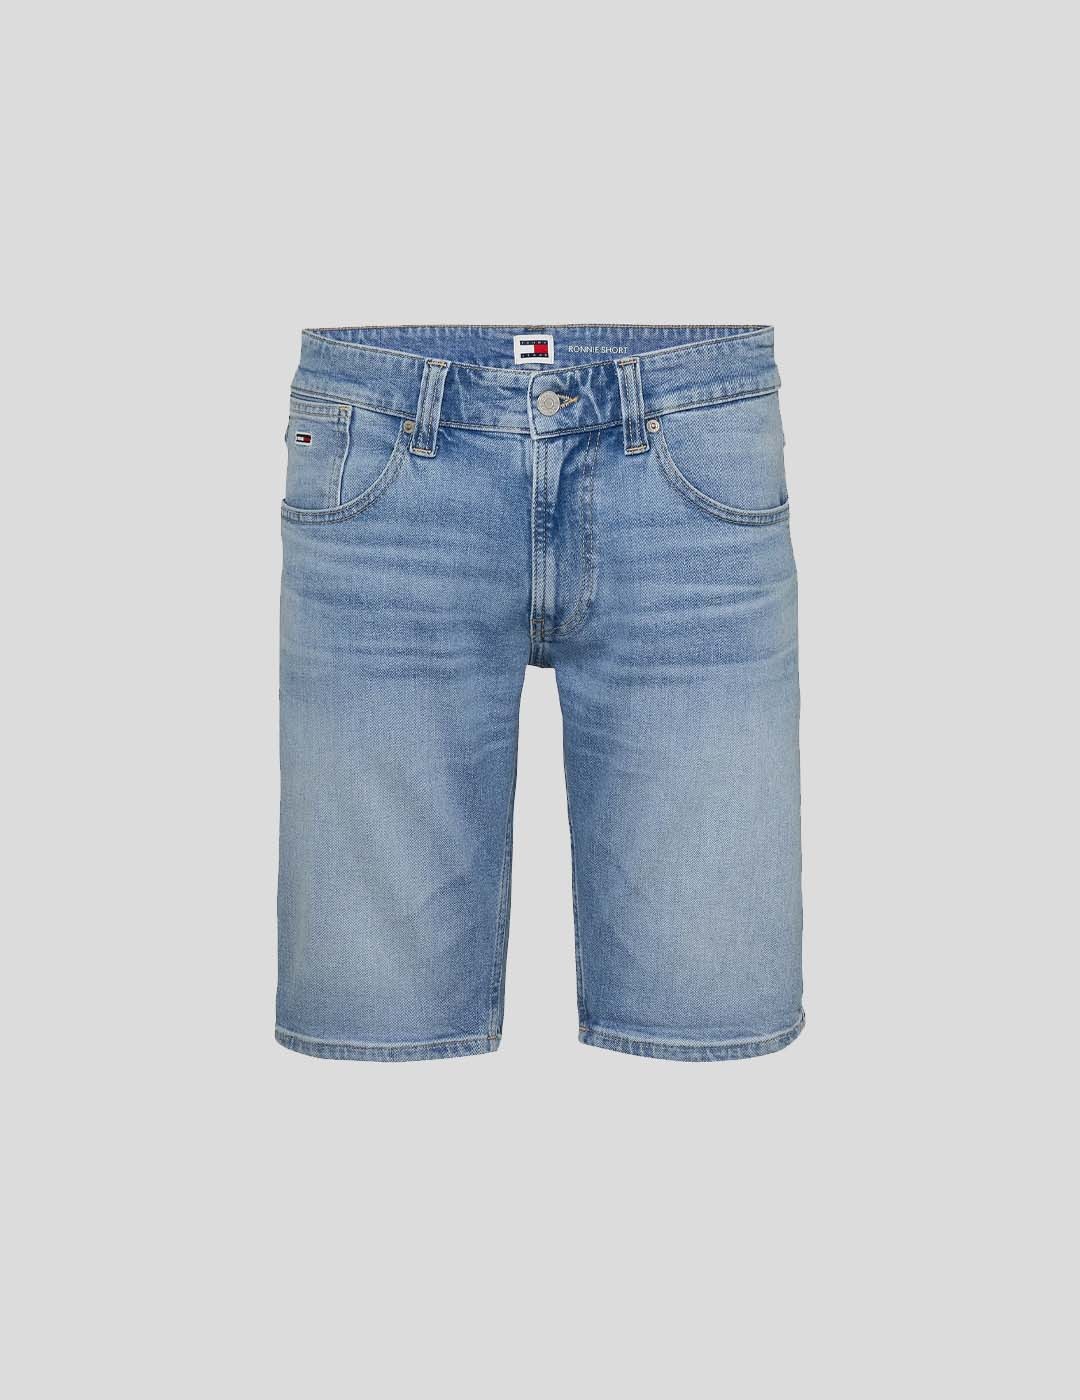 SHORTS TOMMY JEANS RONNIE SHORT 1AB LIGHT BLUE